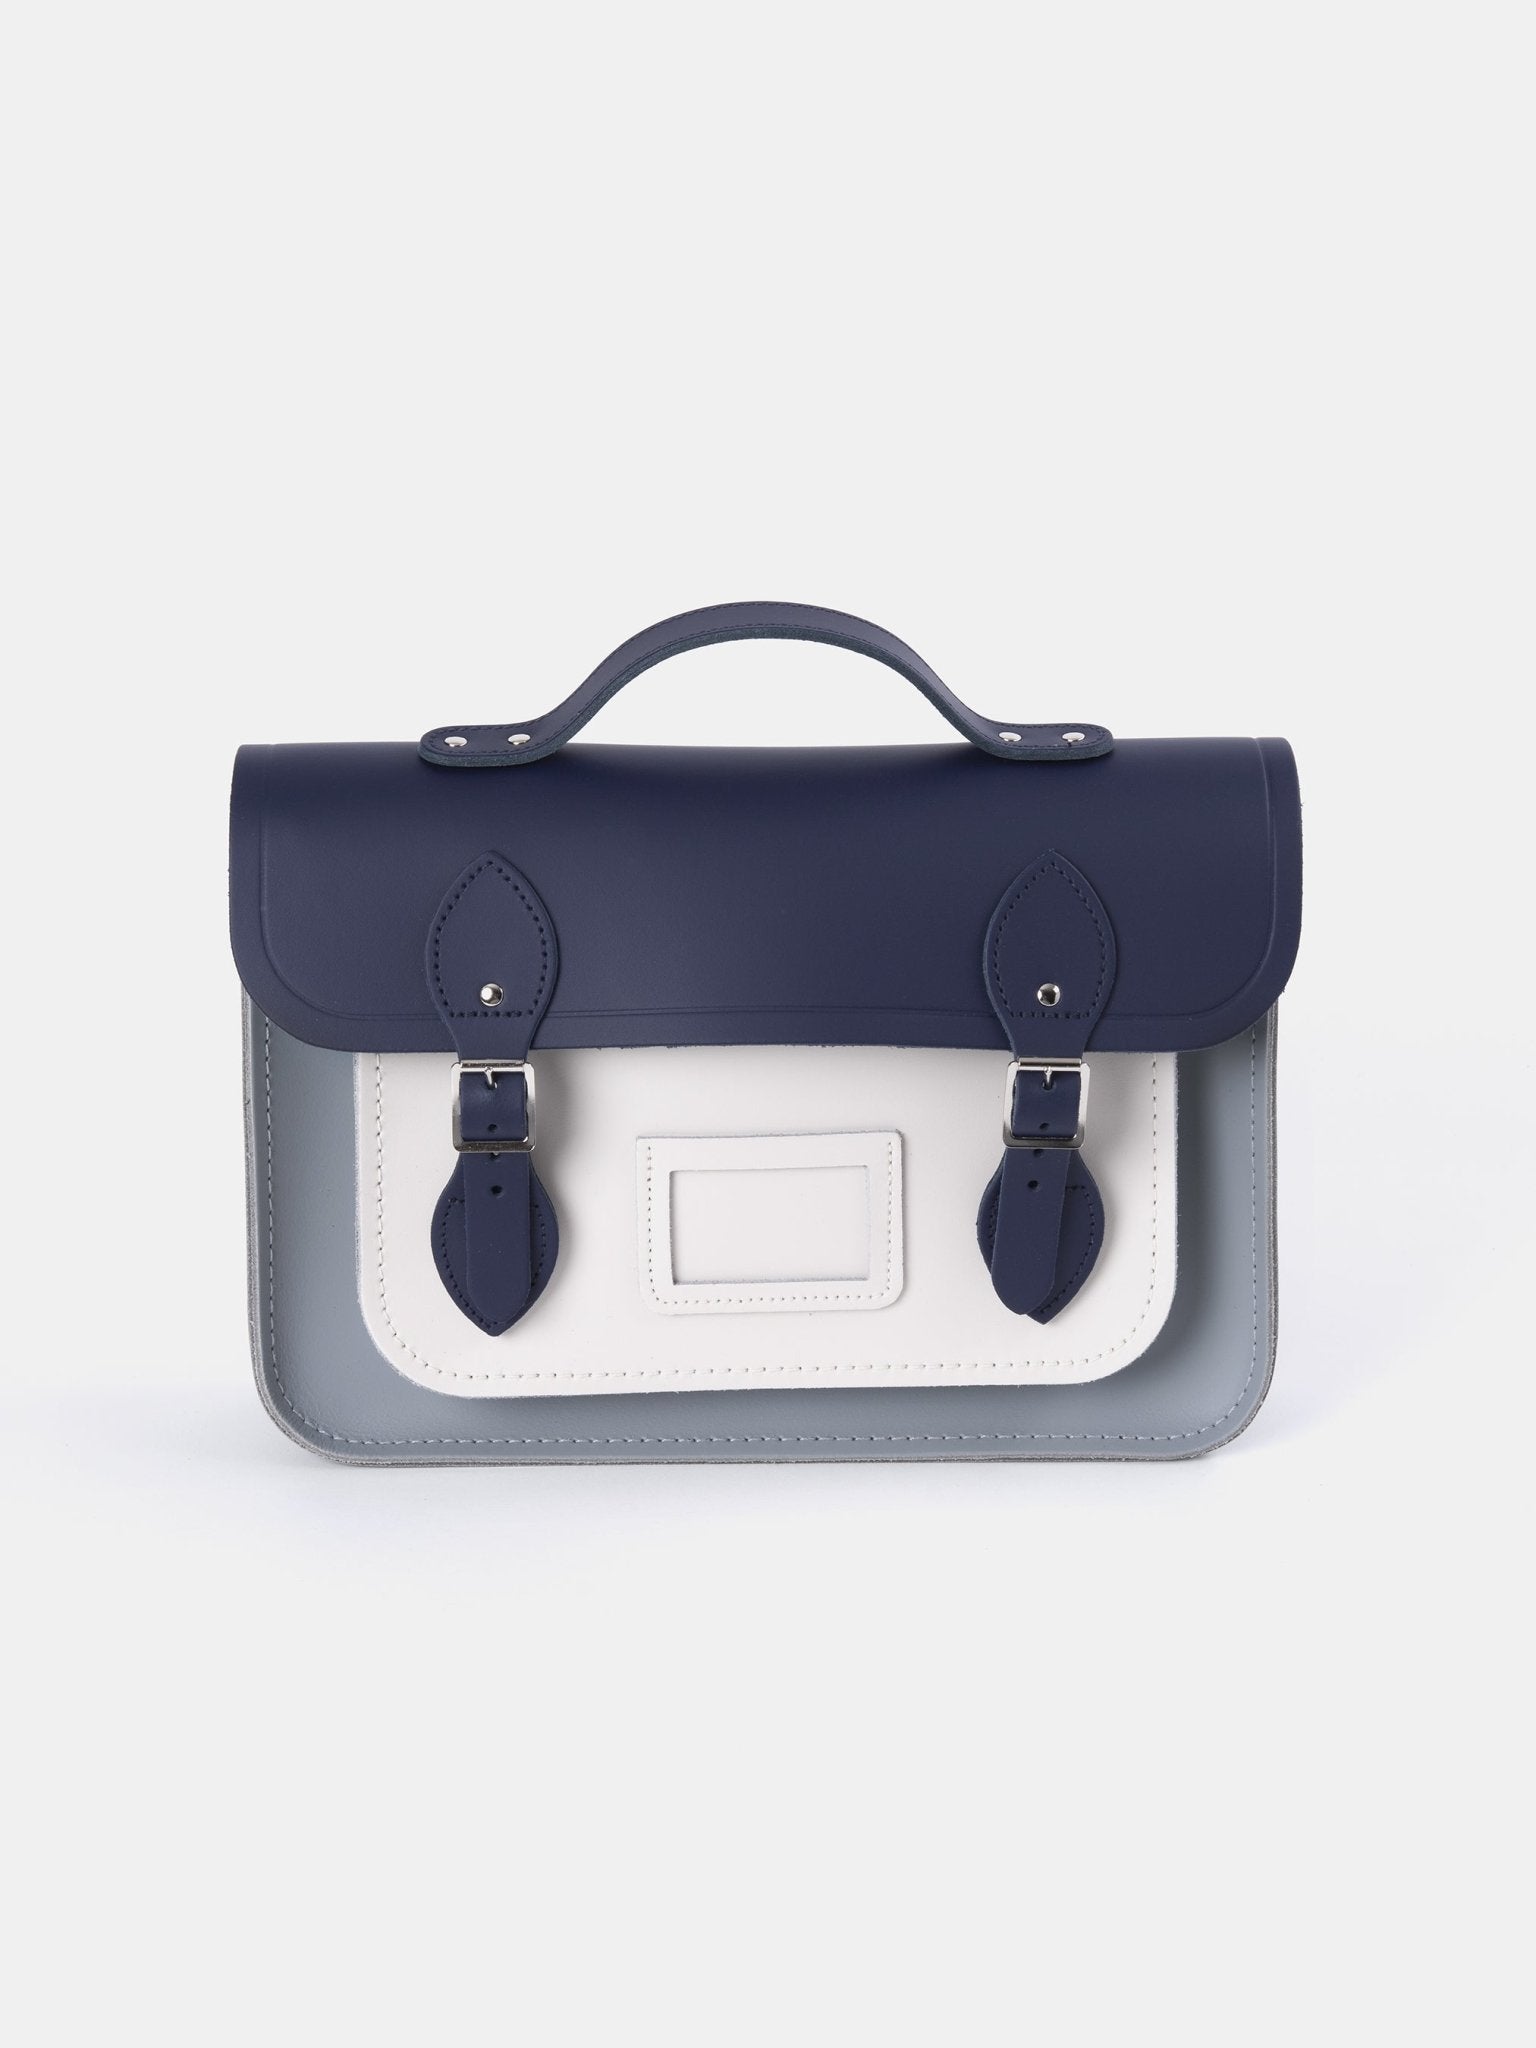 The 13 Inch Batchel - Midnight Picnic Matte, French Grey & Clay - The Cambridge Satchel Company UK Store